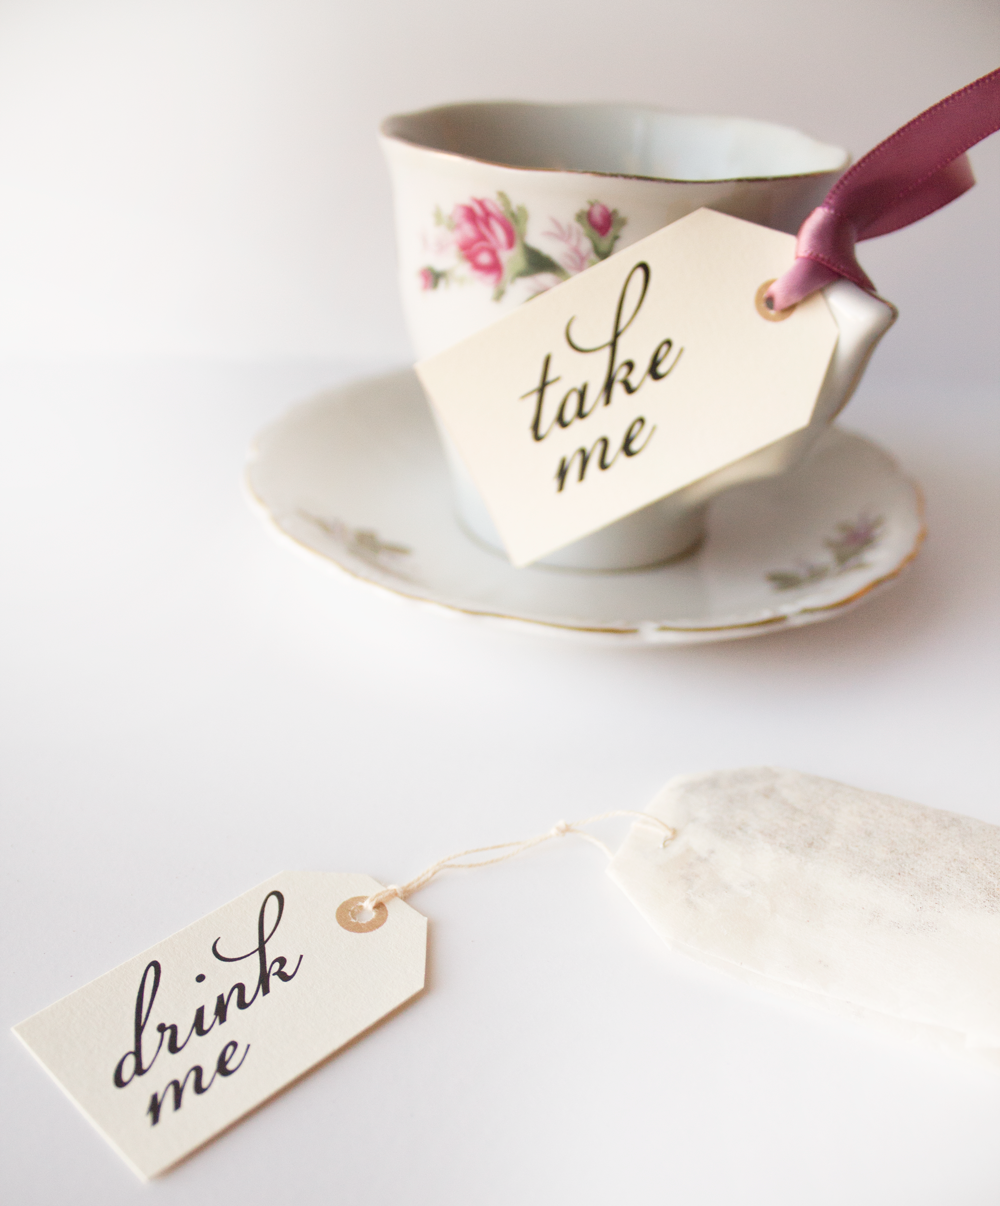 A tea cup with a tag fastened with pink ribbon that says "take me." laying in front of it is a tea bag with a tag that says "drink me."